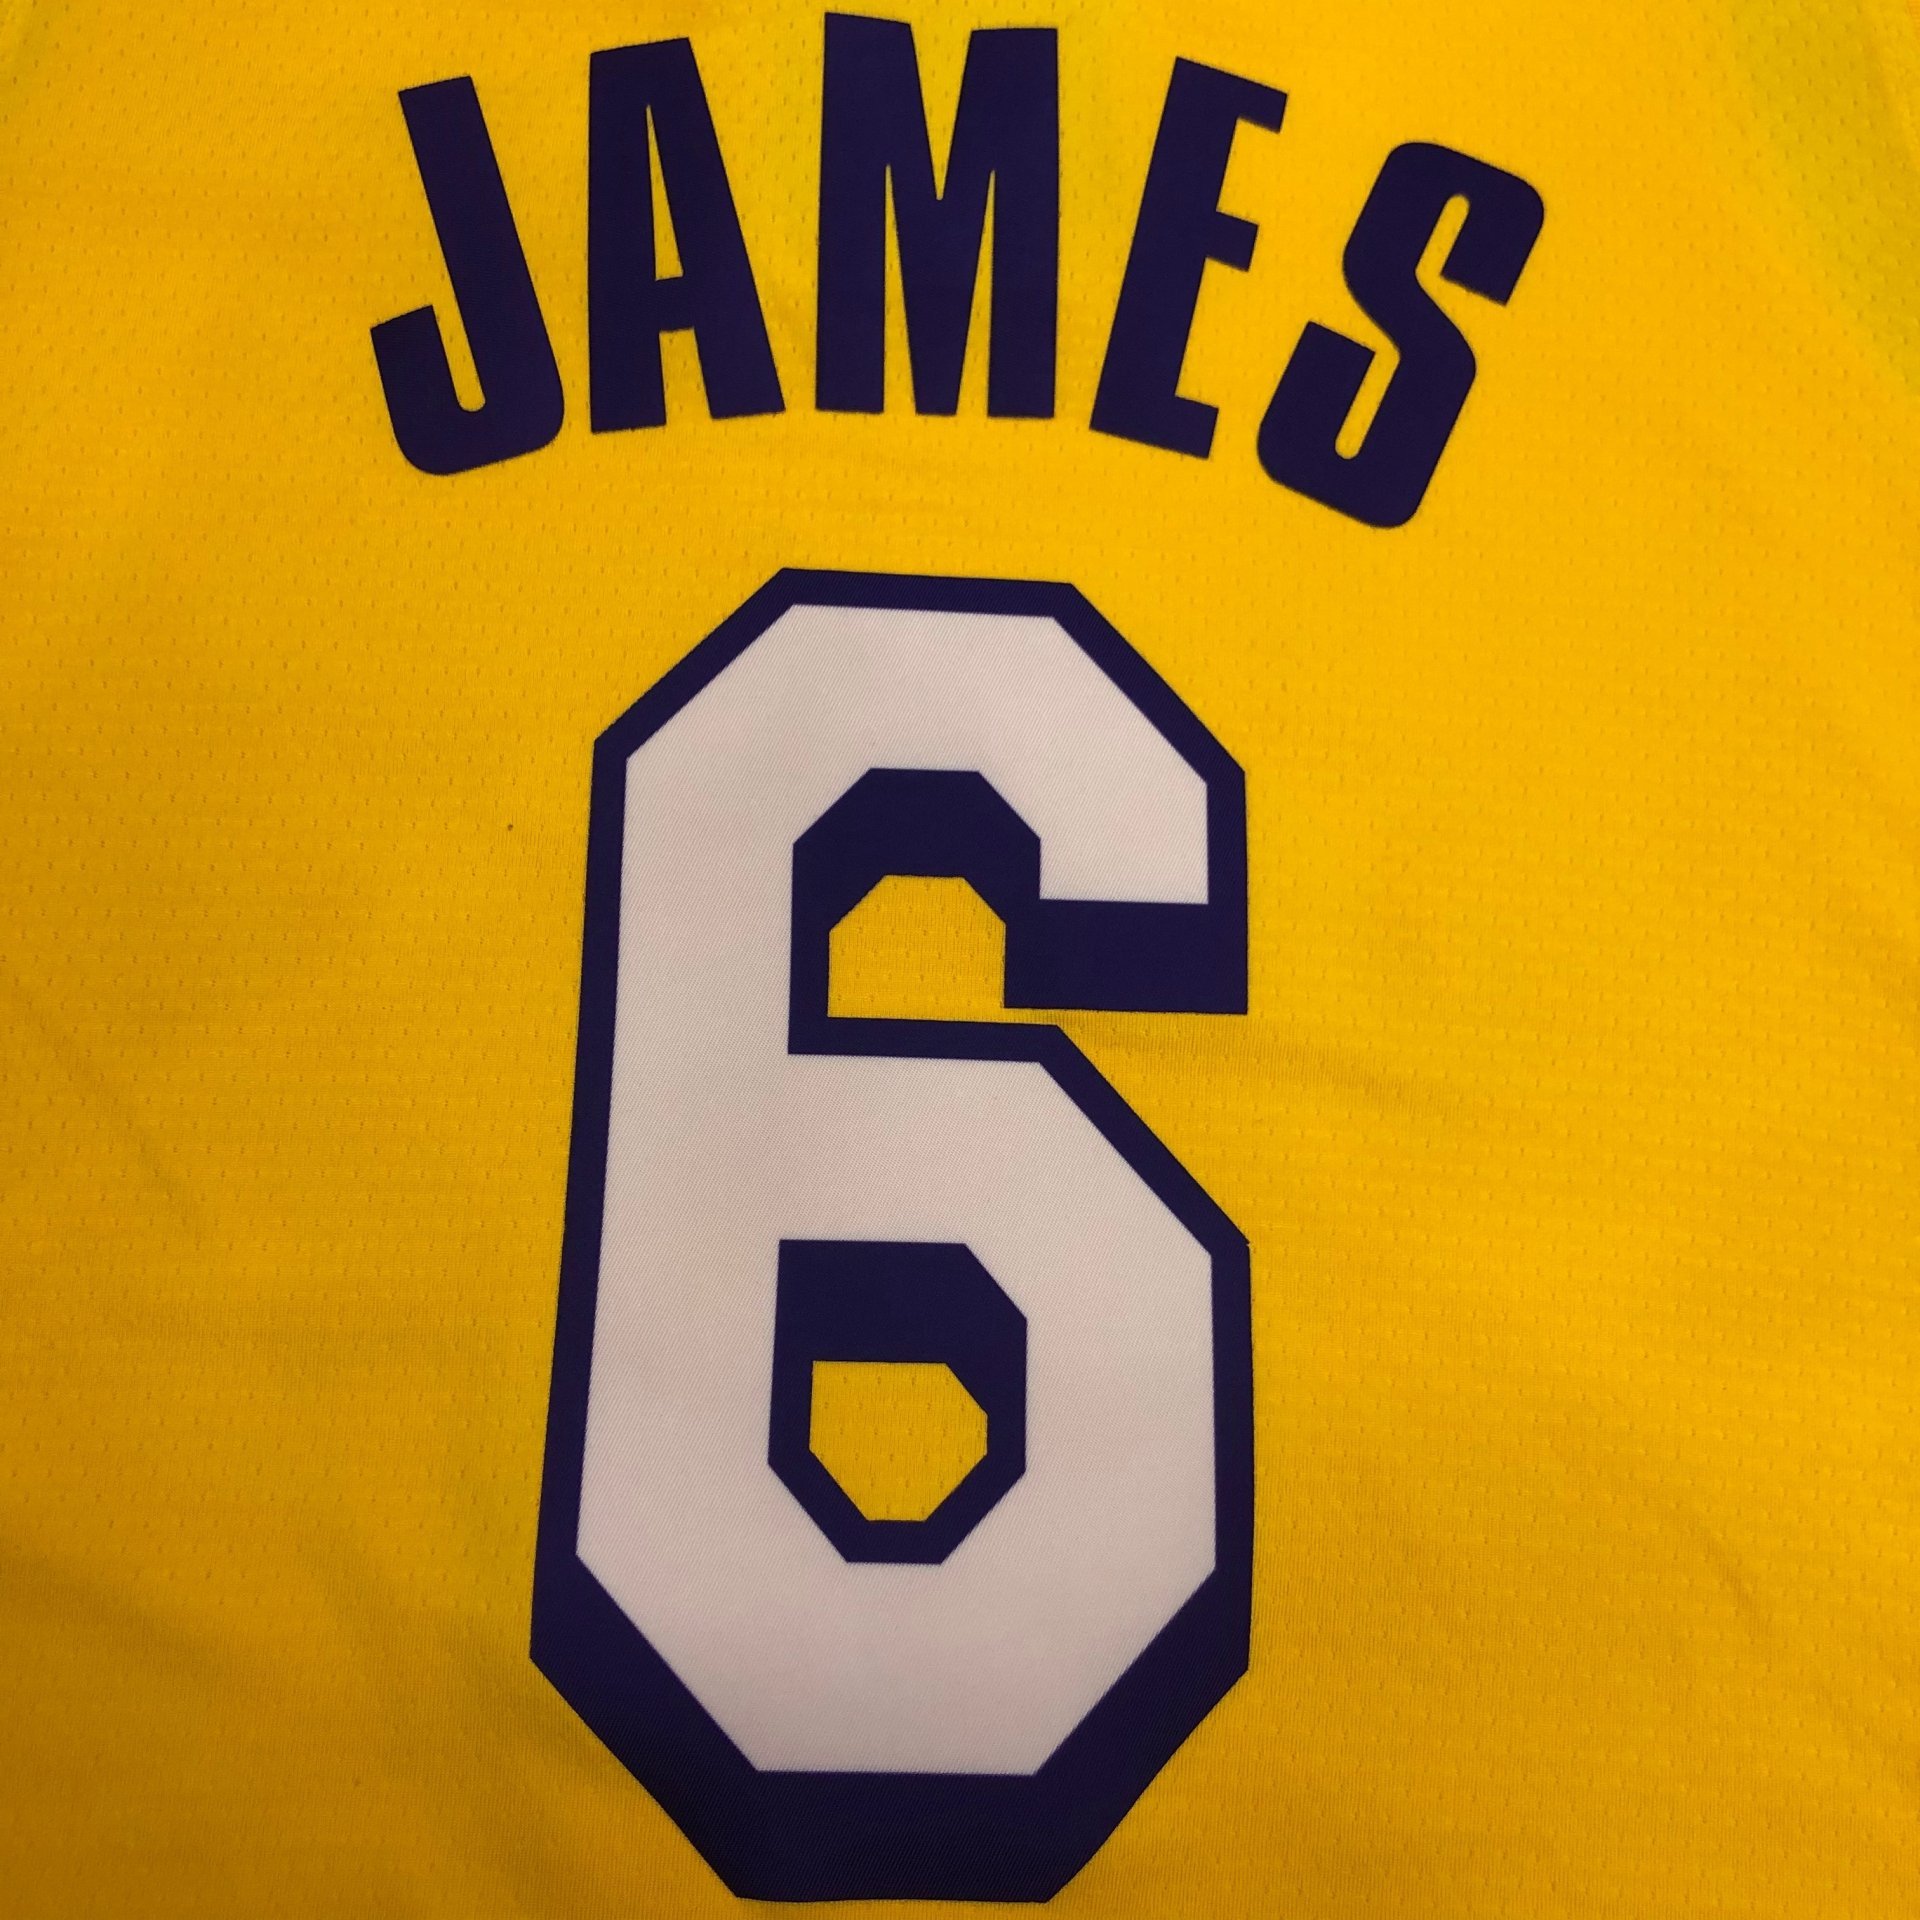 Lebron James #6 Los Angeles Lakers NBA Brand Yellow Jersey Adult